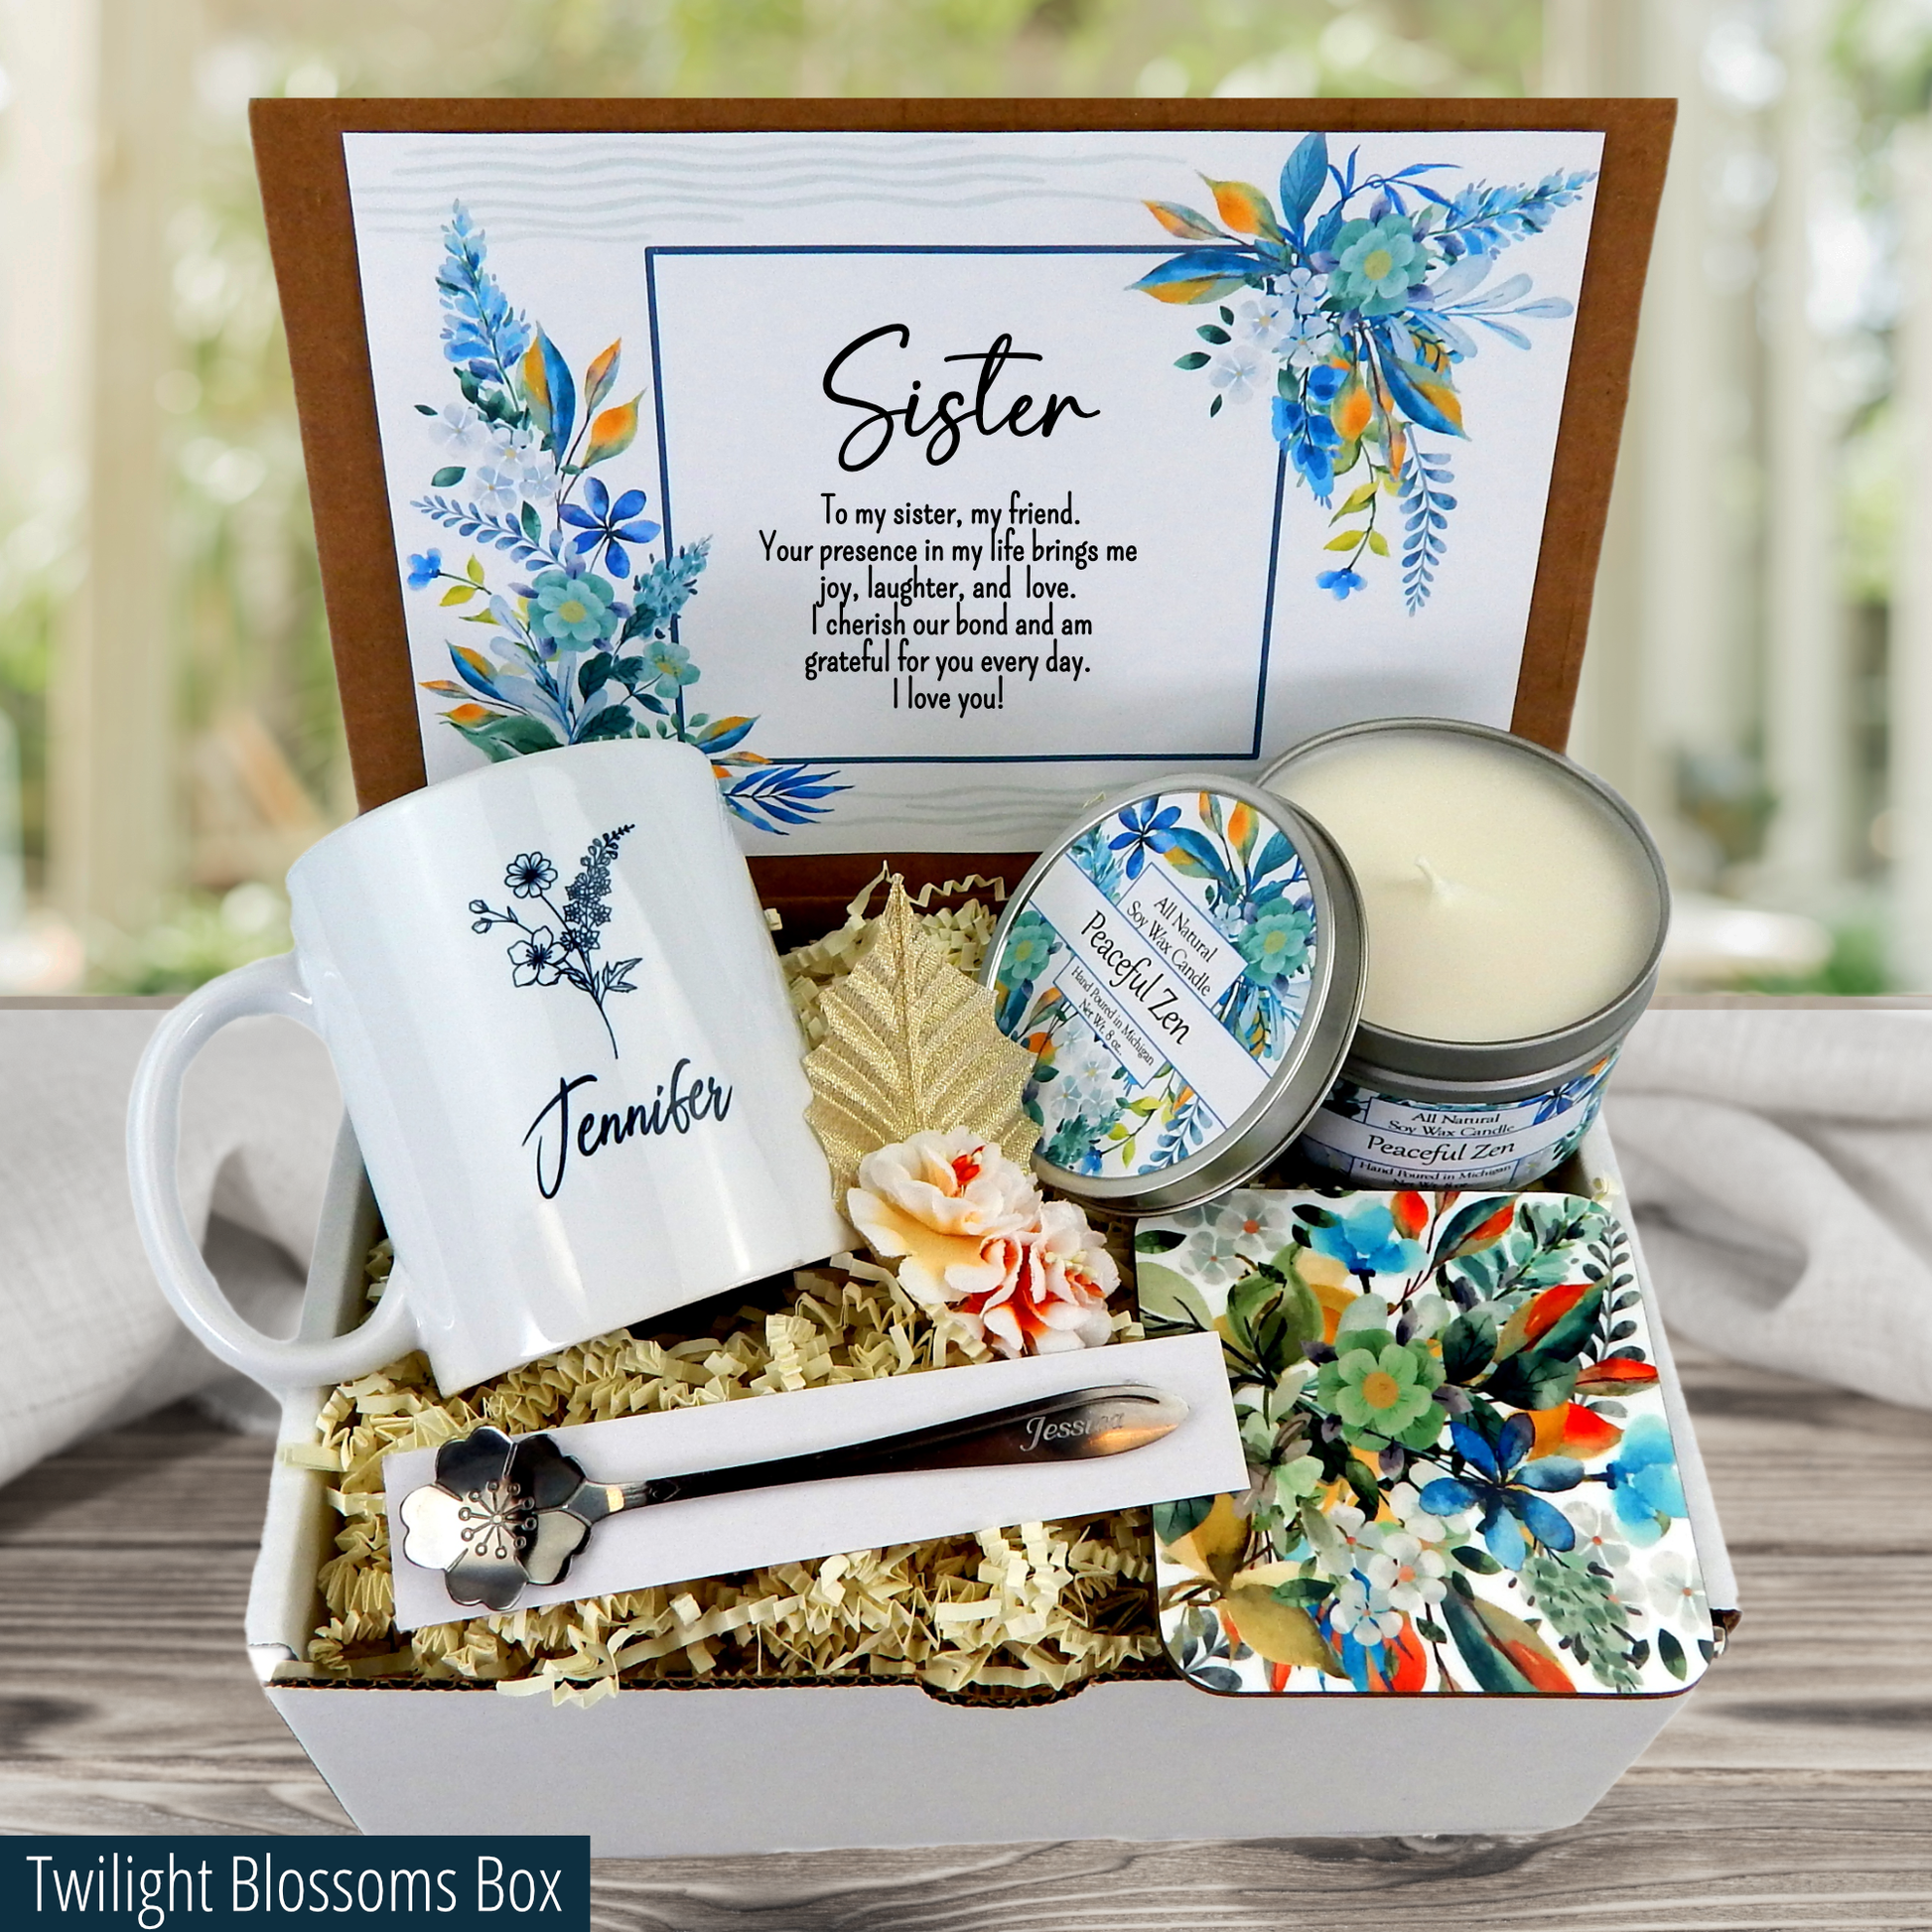 Celebrate sisterhood with a special gift basket: custom mug, engraved spoon, coaster, candle, and sisterly message.